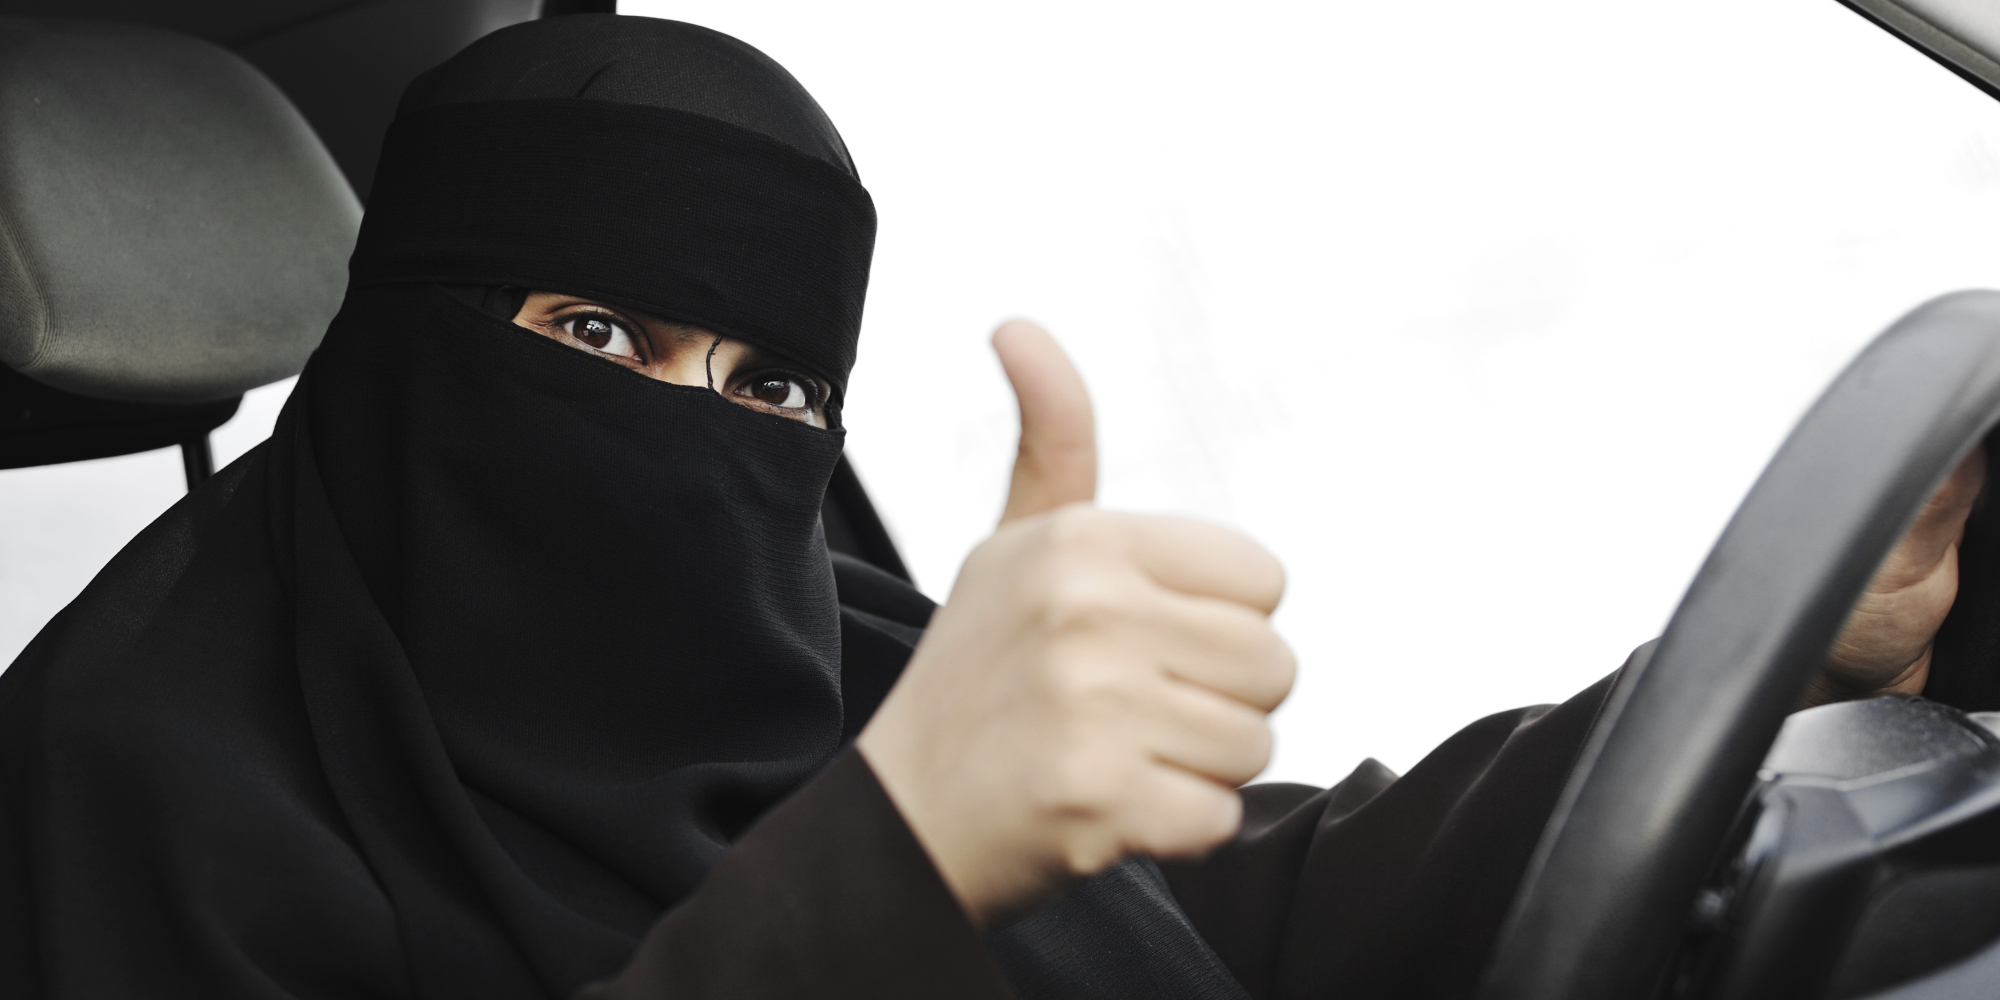 How Saudi women’s license to drive has dealt a major blow to radicals